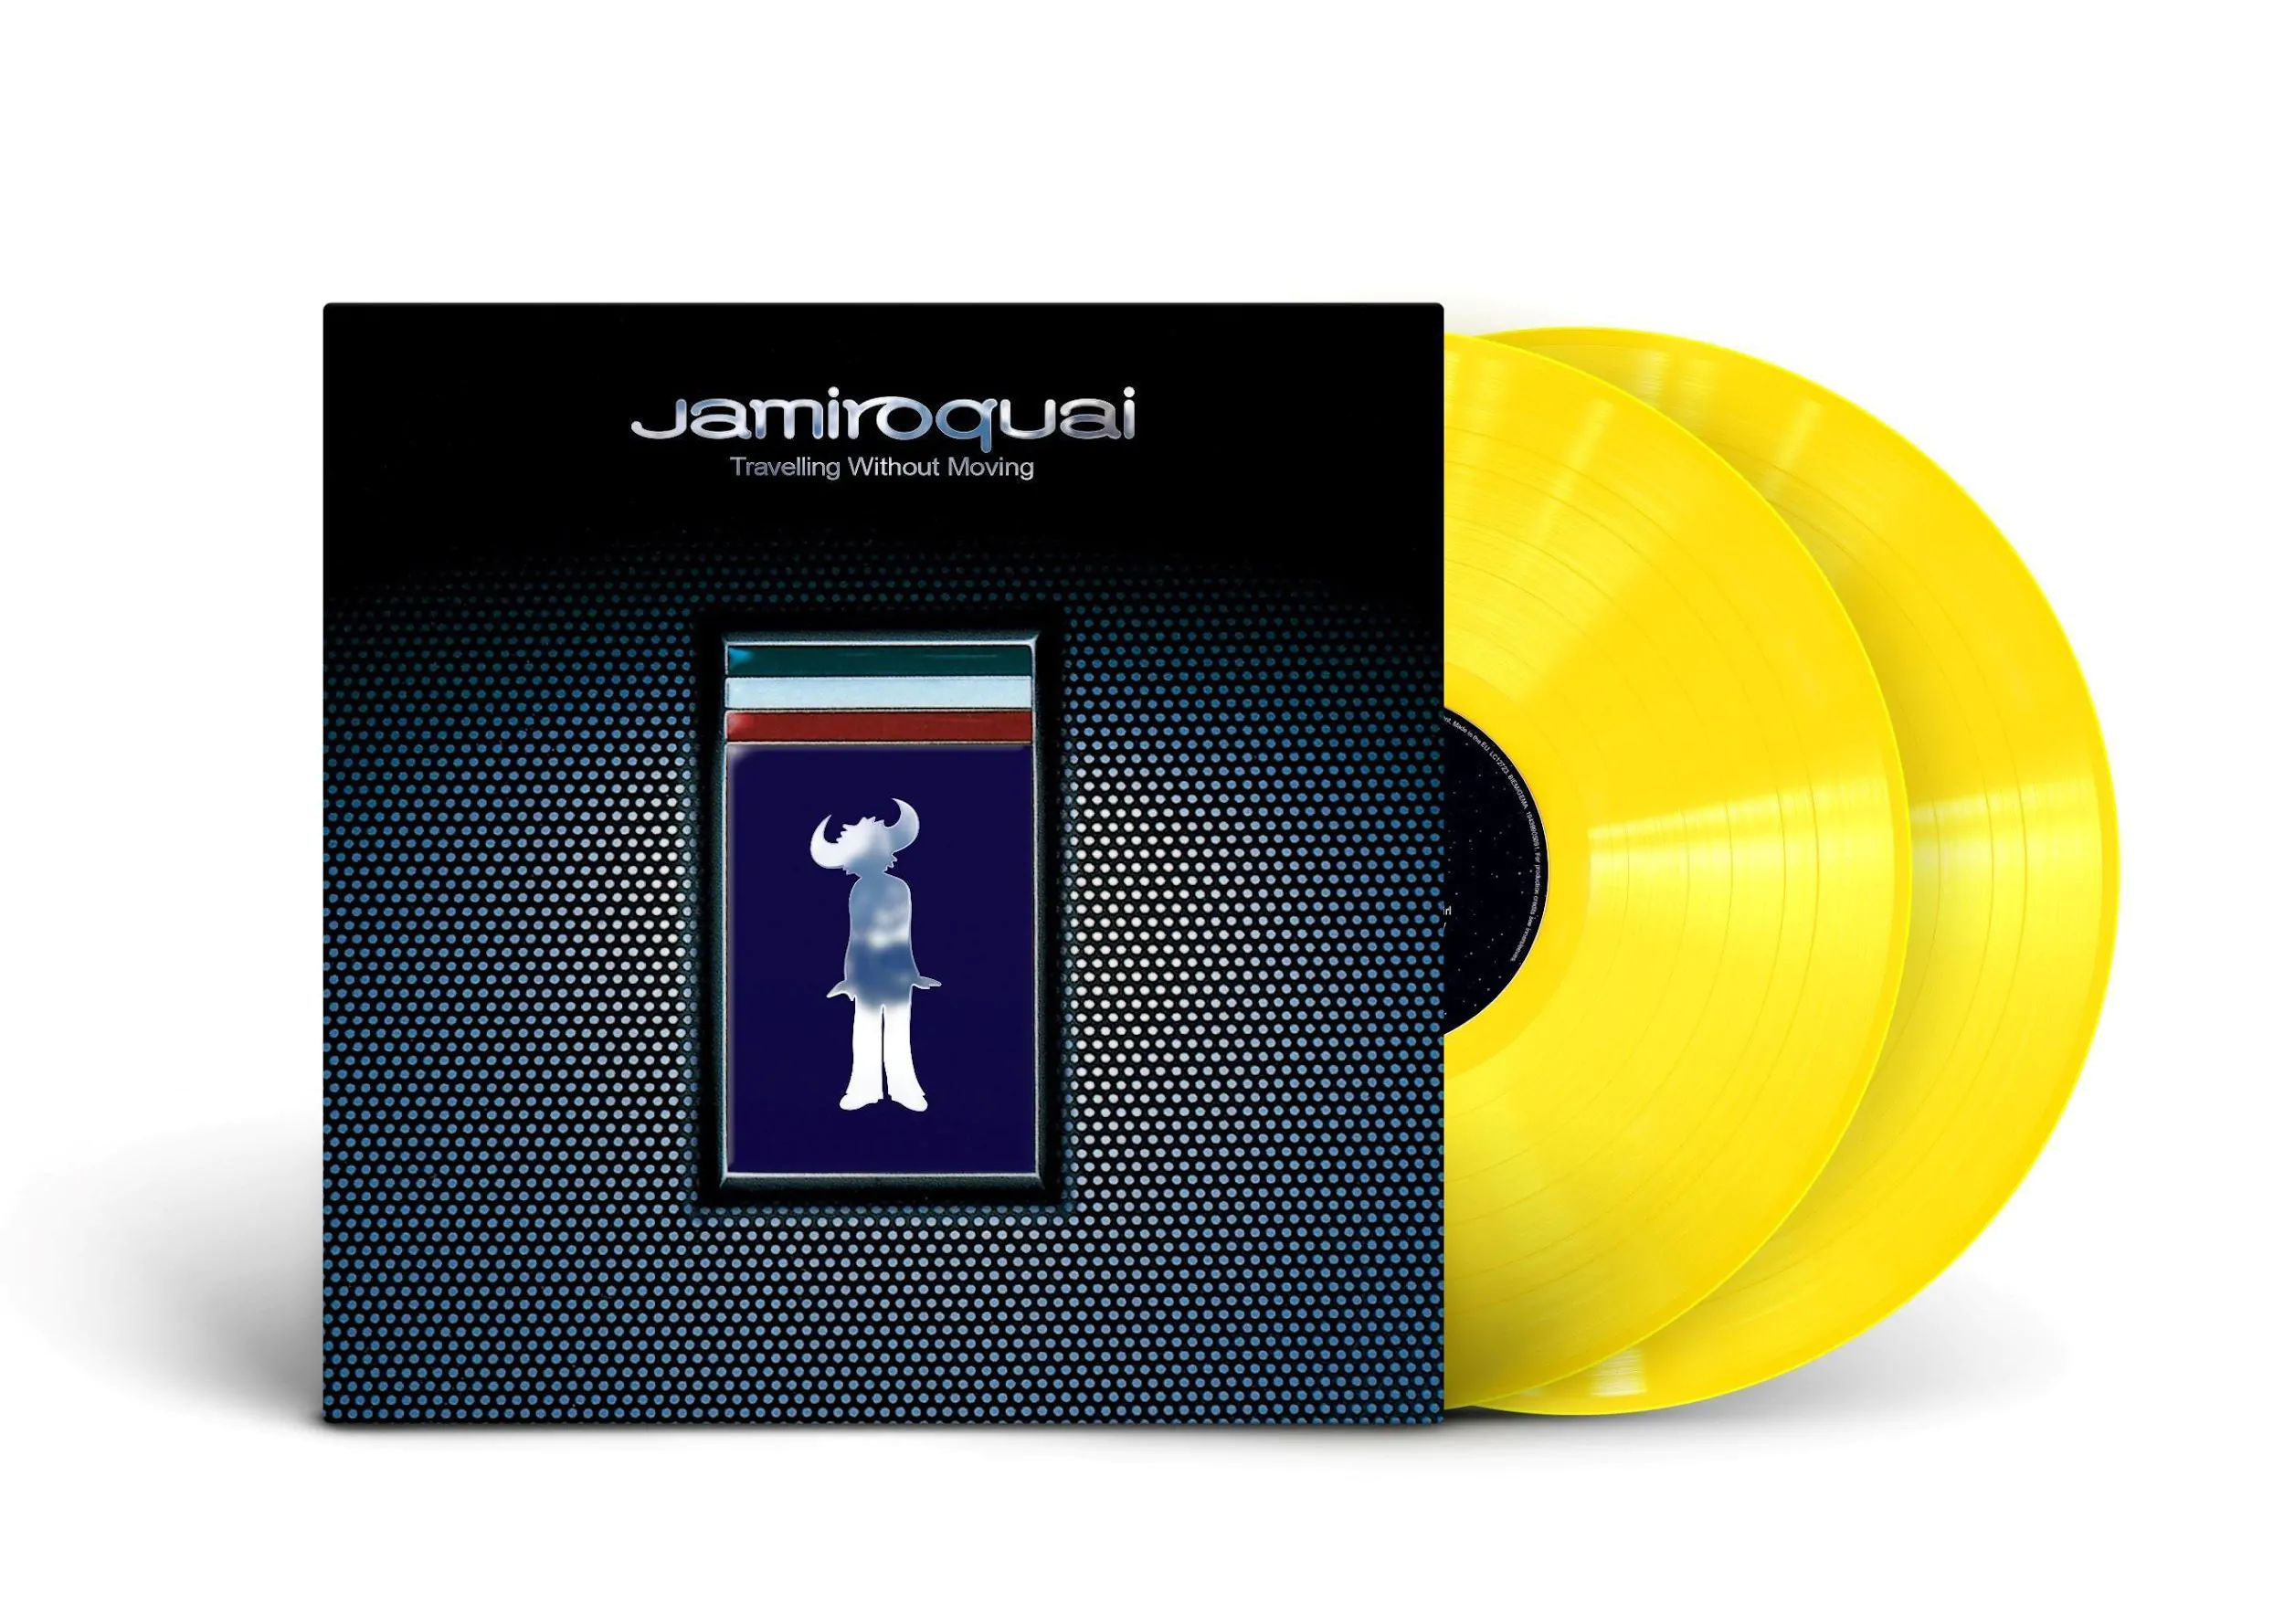 JAMIROQUAI announces ‘Travelling Without Moving’ (25th anniversary edition)